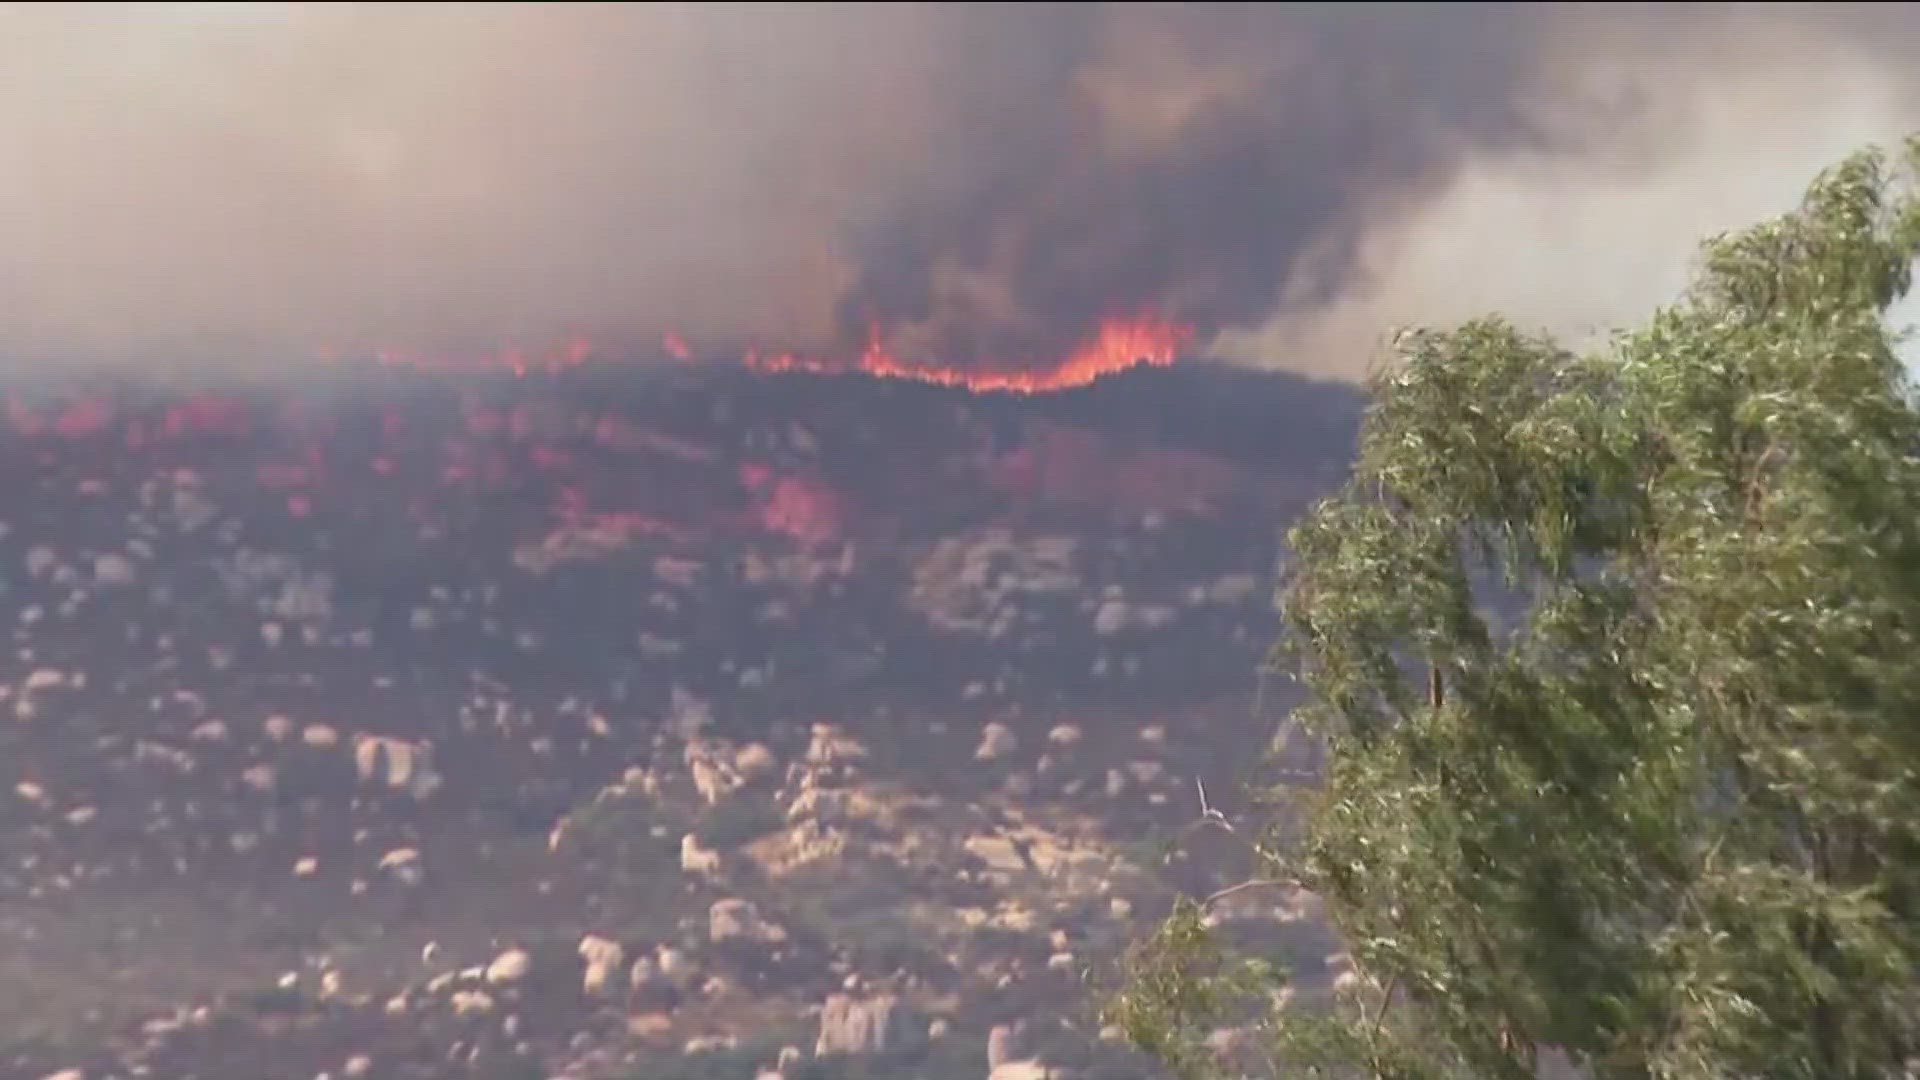 A brush fire driven by intense heat has charred at least 400 acres in the East County area of San Diego.